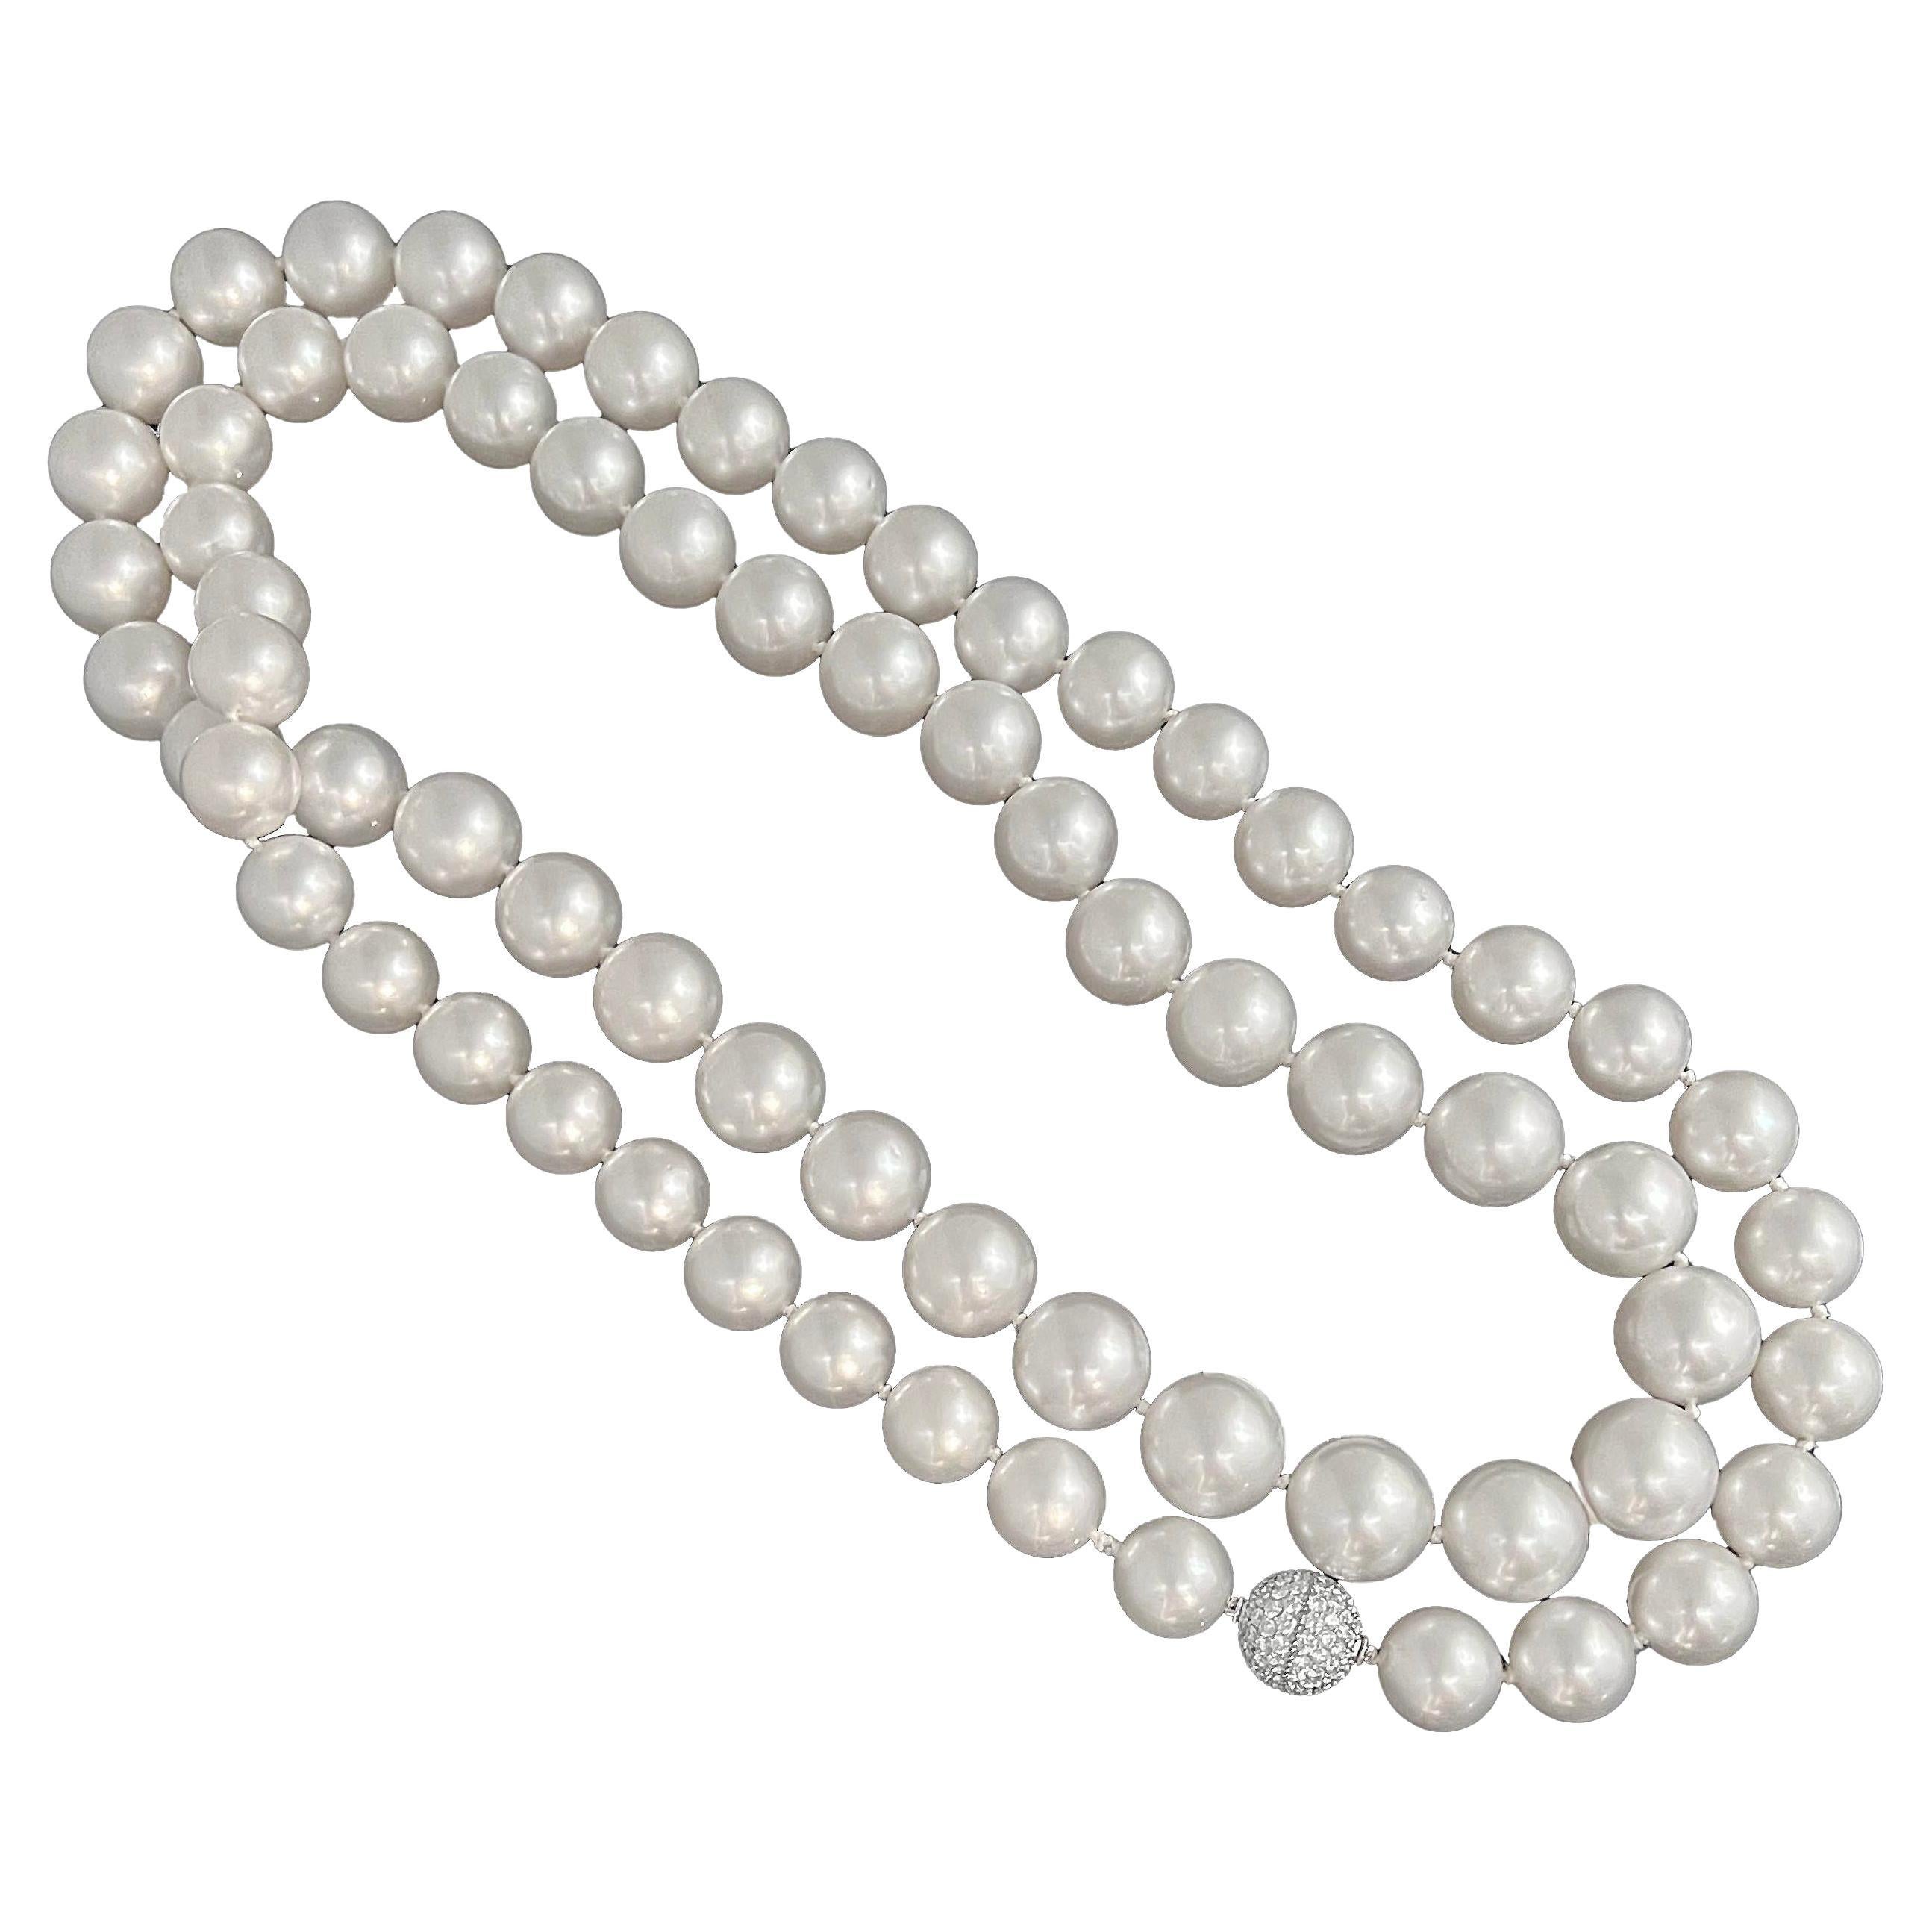 Large South Sea Pearl Necklace With Platinum Diamond Clasp